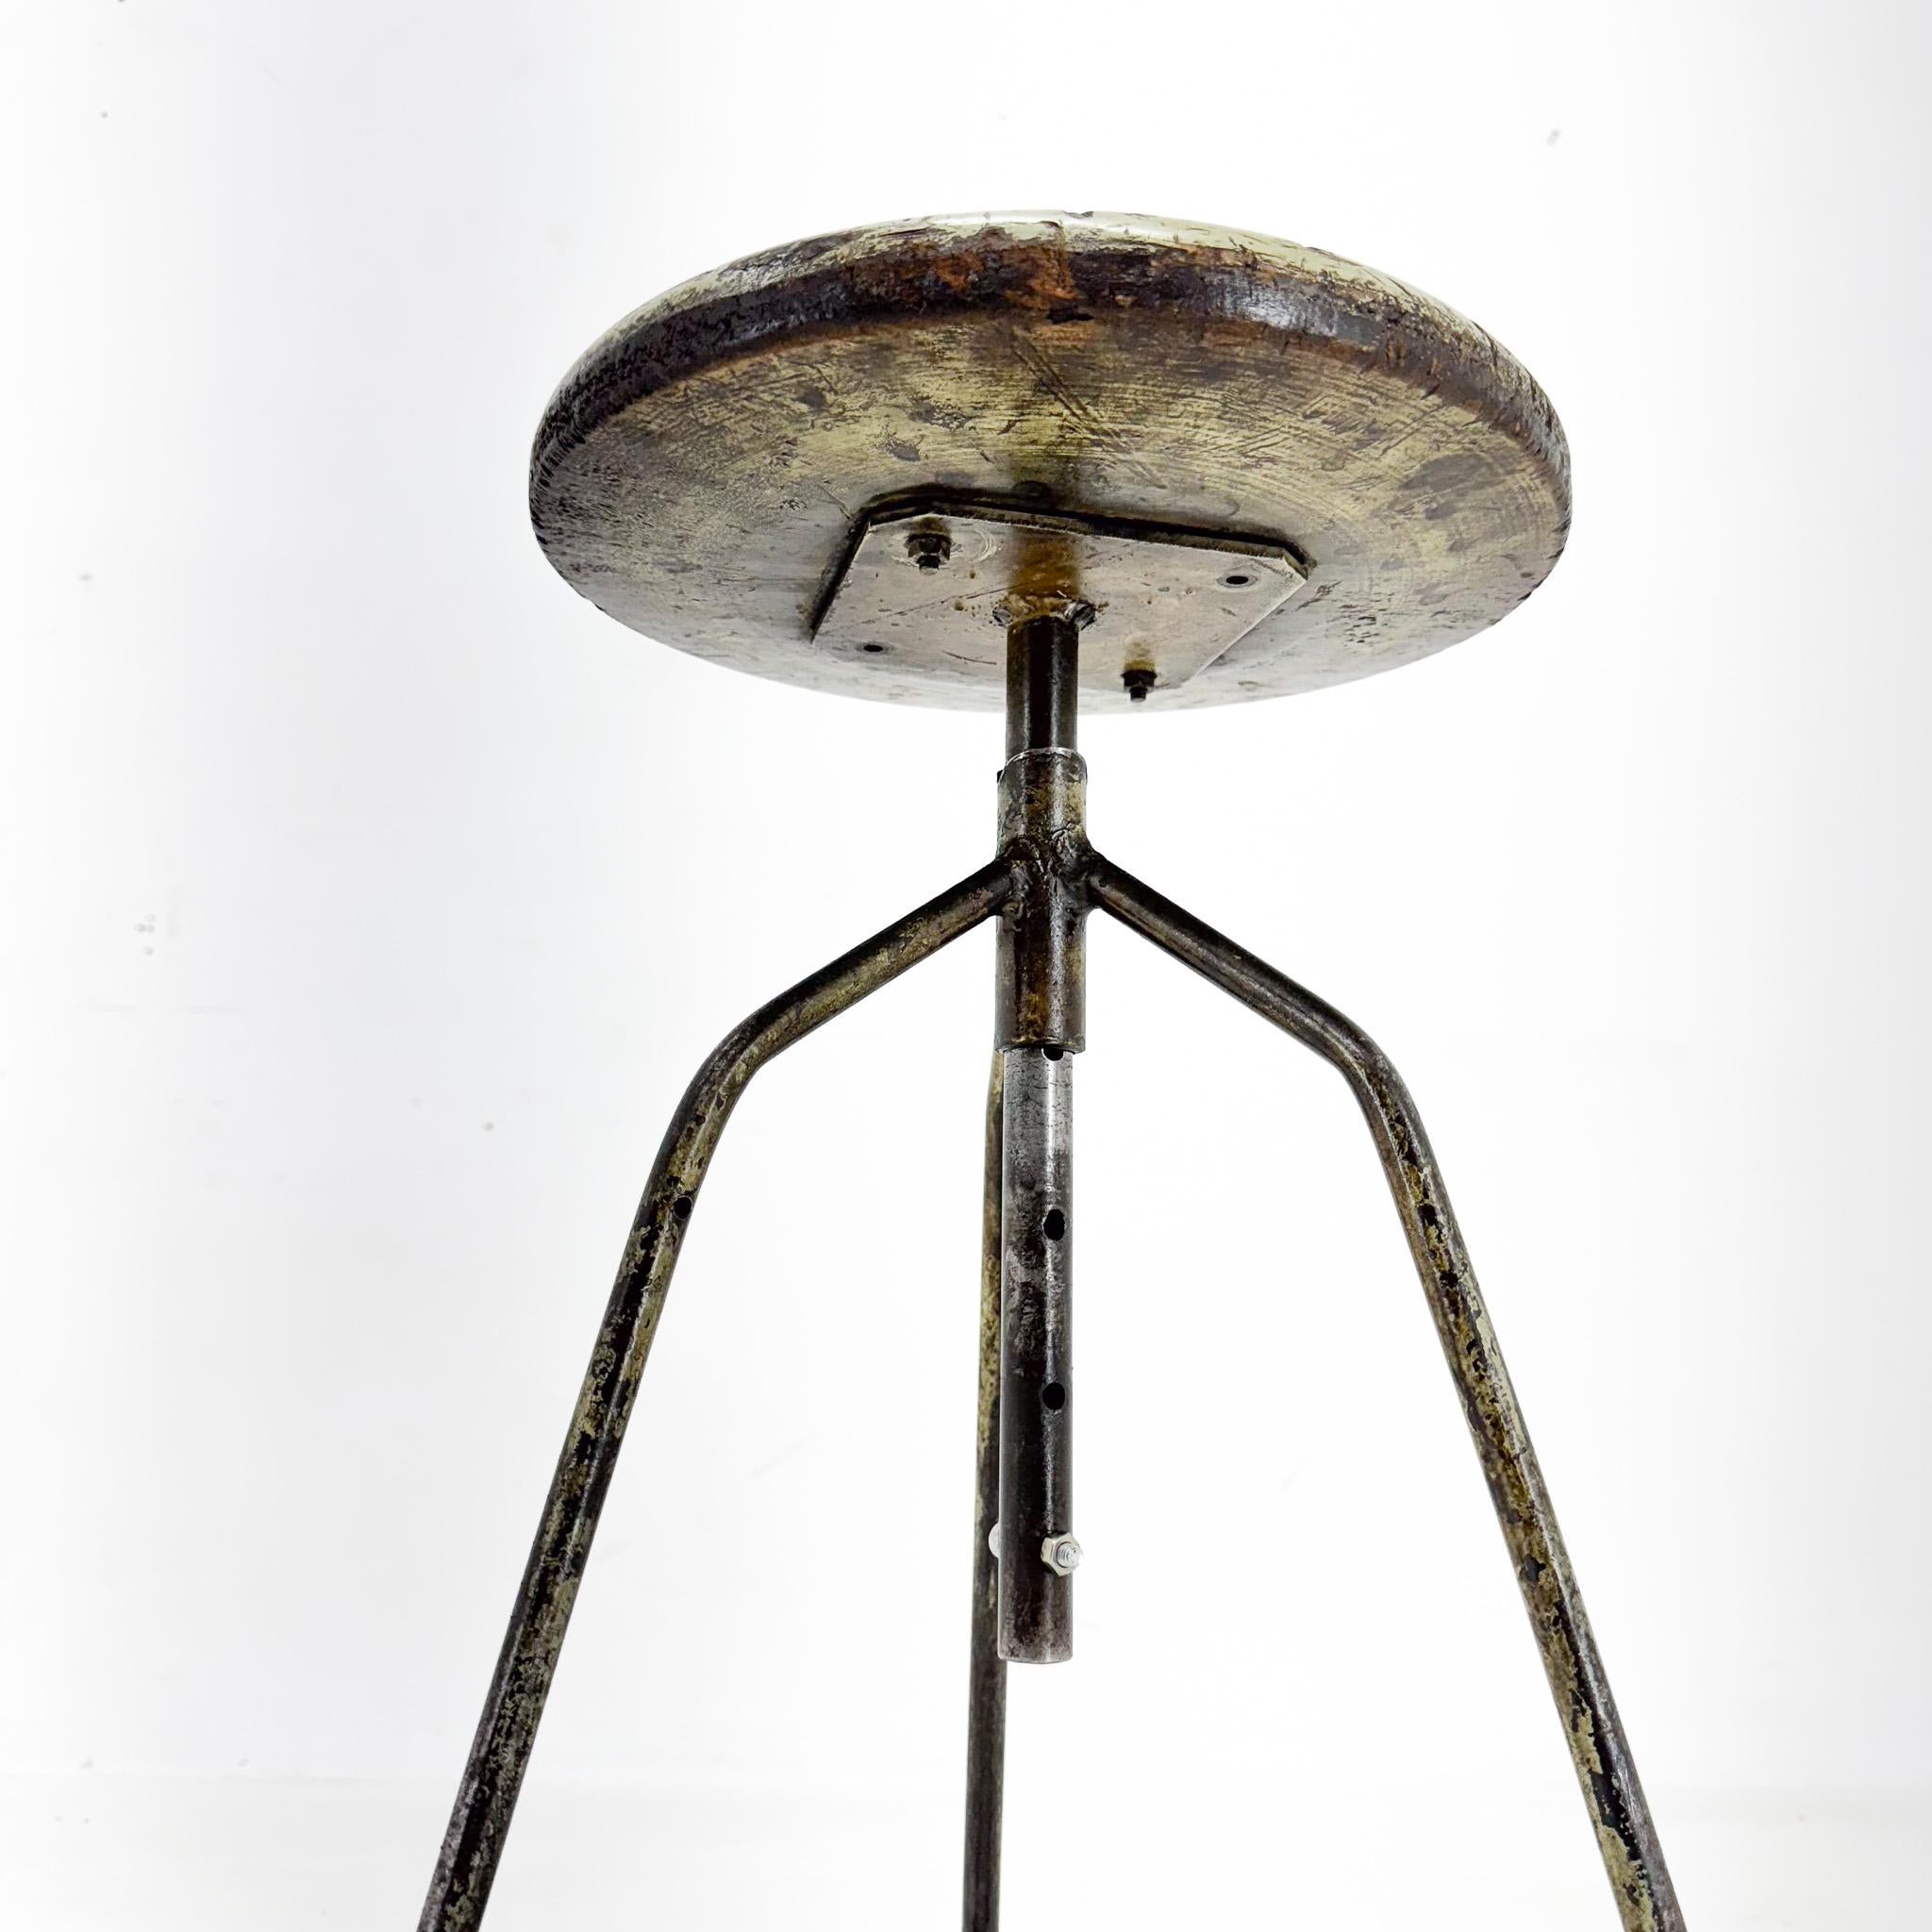 Vintage Industrial Steel & Wood Tripod Stool with Original Patina, 1950's For Sale 2